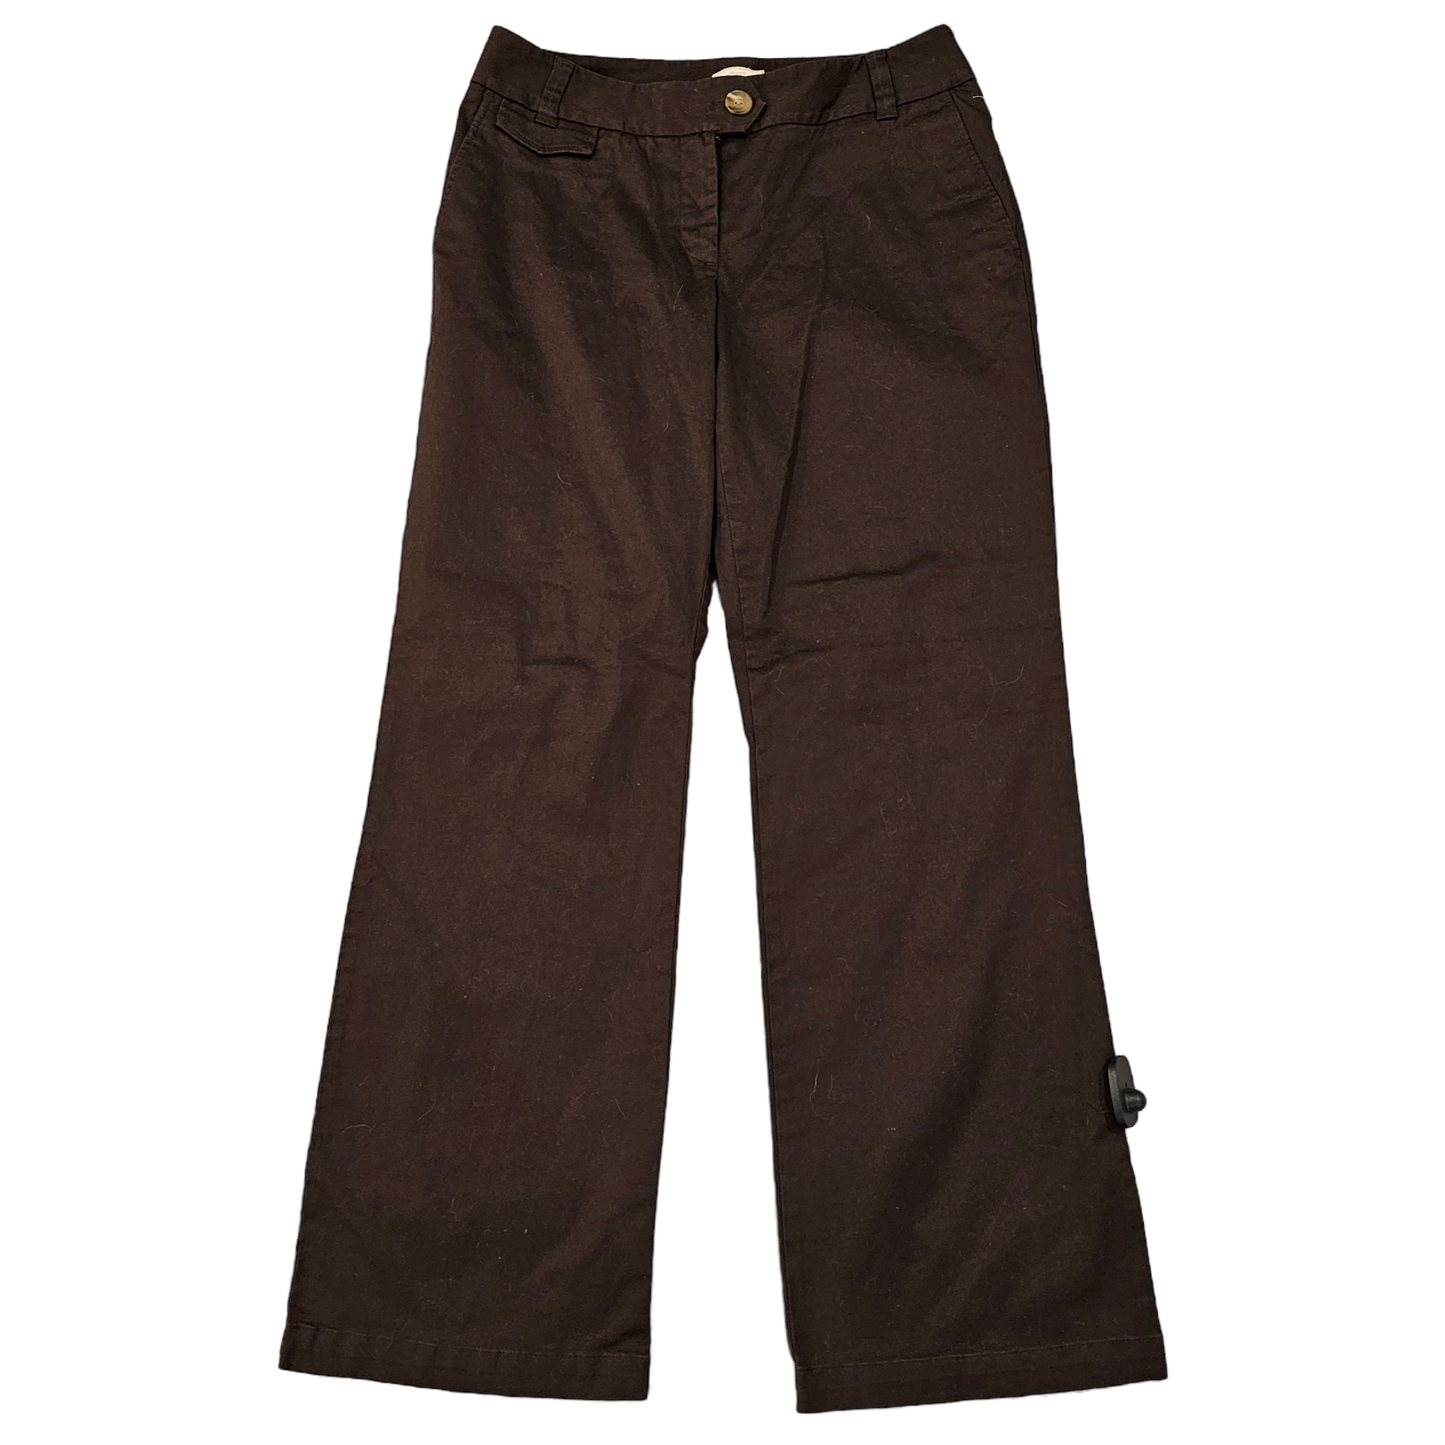 Pants Chinos & Khakis By Chicos  Size: M